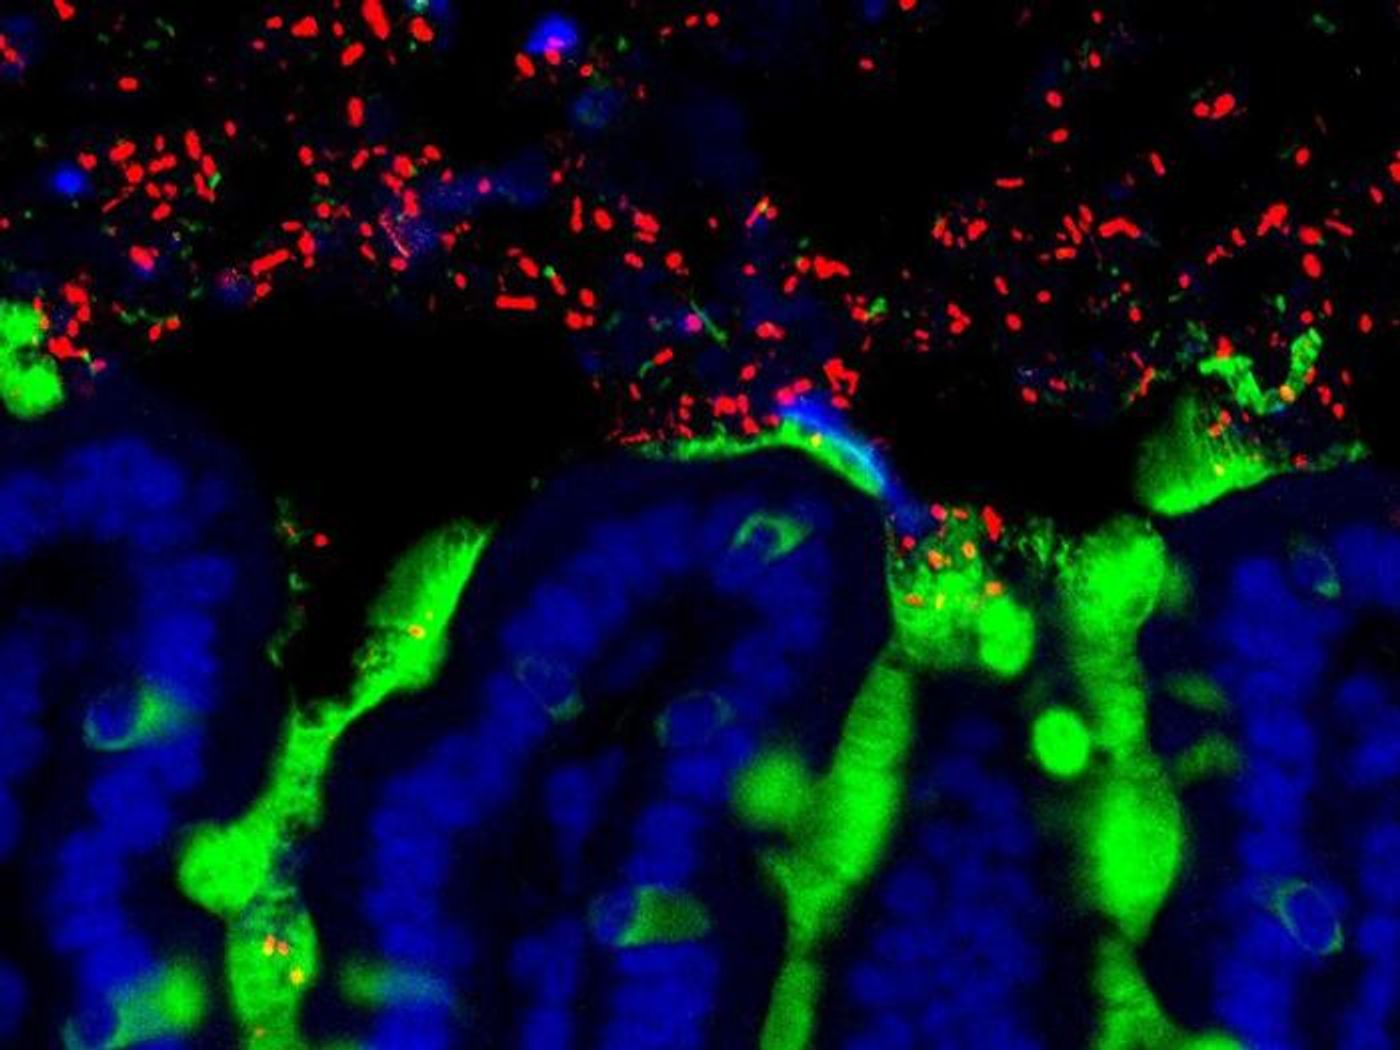 Commensal bacteria (red) amongst the mucus (green) and epithelial cells (blue) in a mouse small intestine.  Credit  University of Chicago.